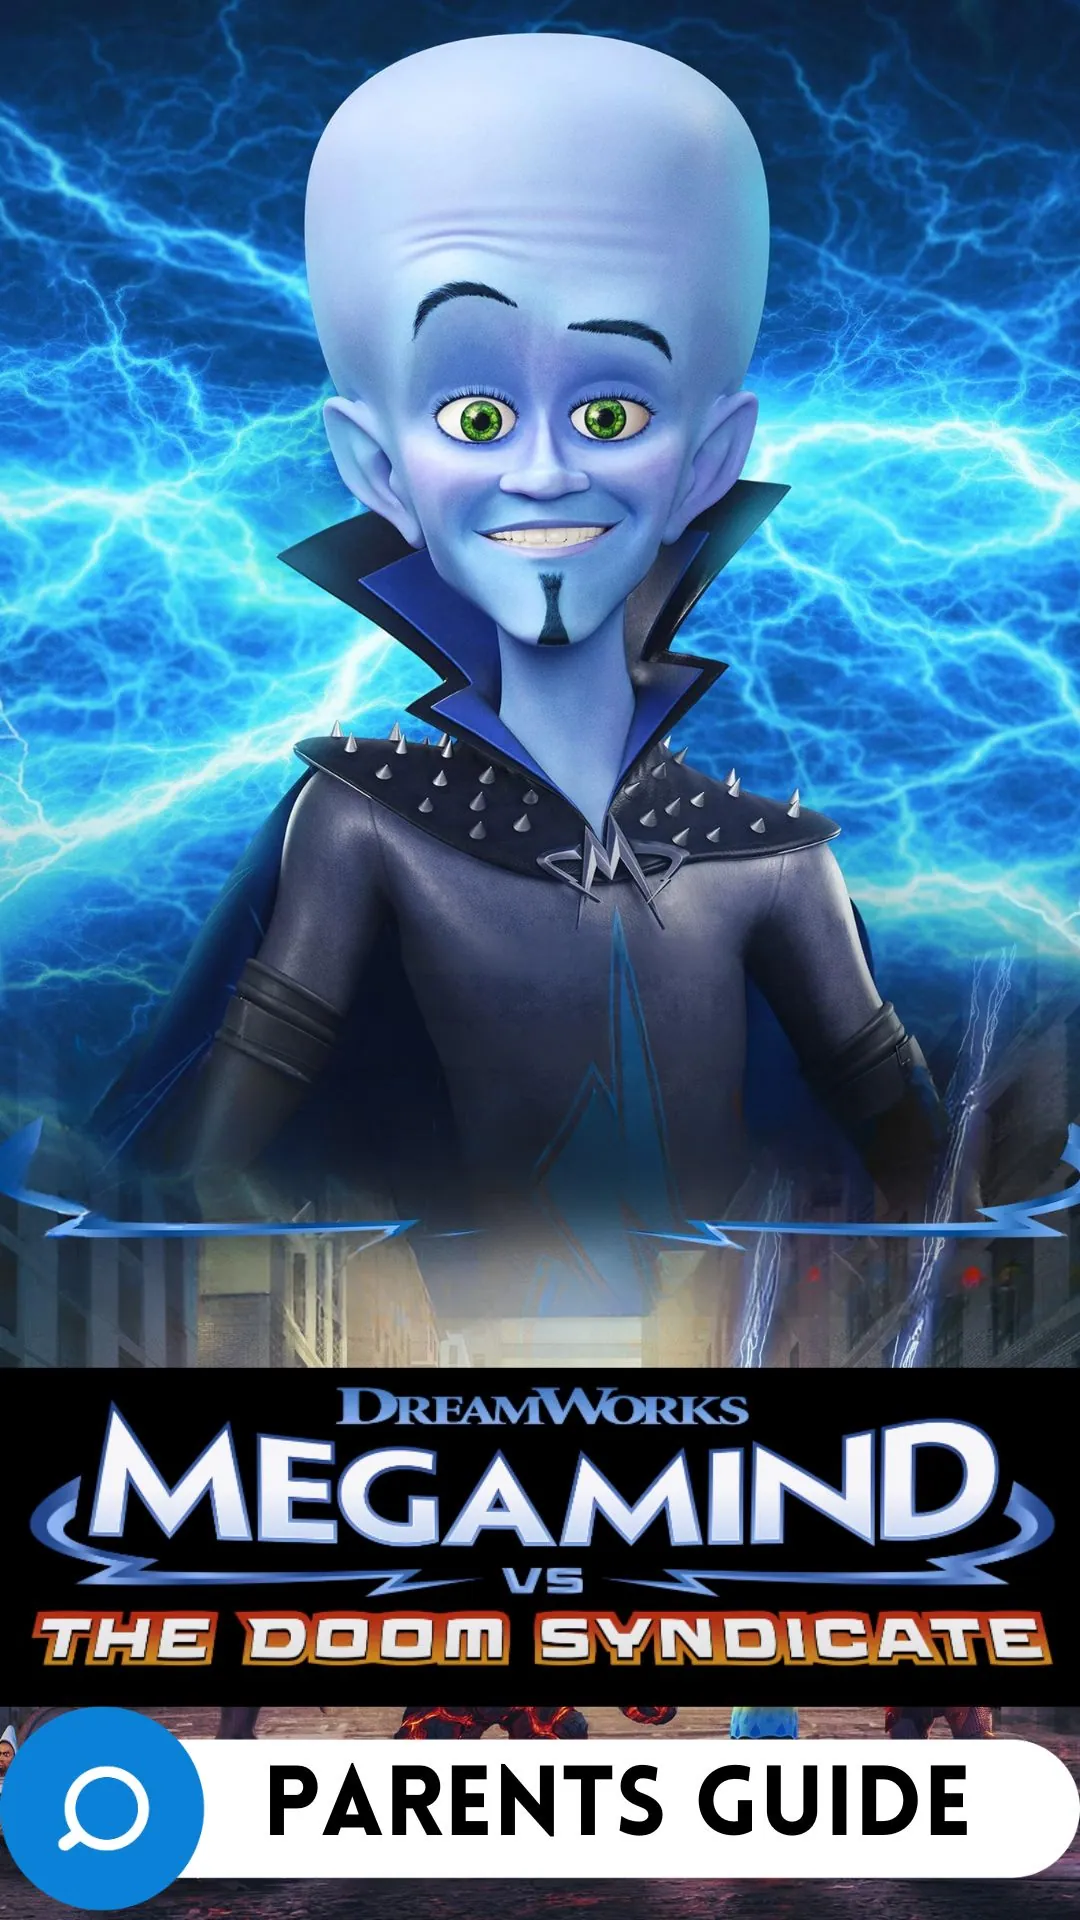 Megamind vs. The Doom Syndicate Parents Guide (1)